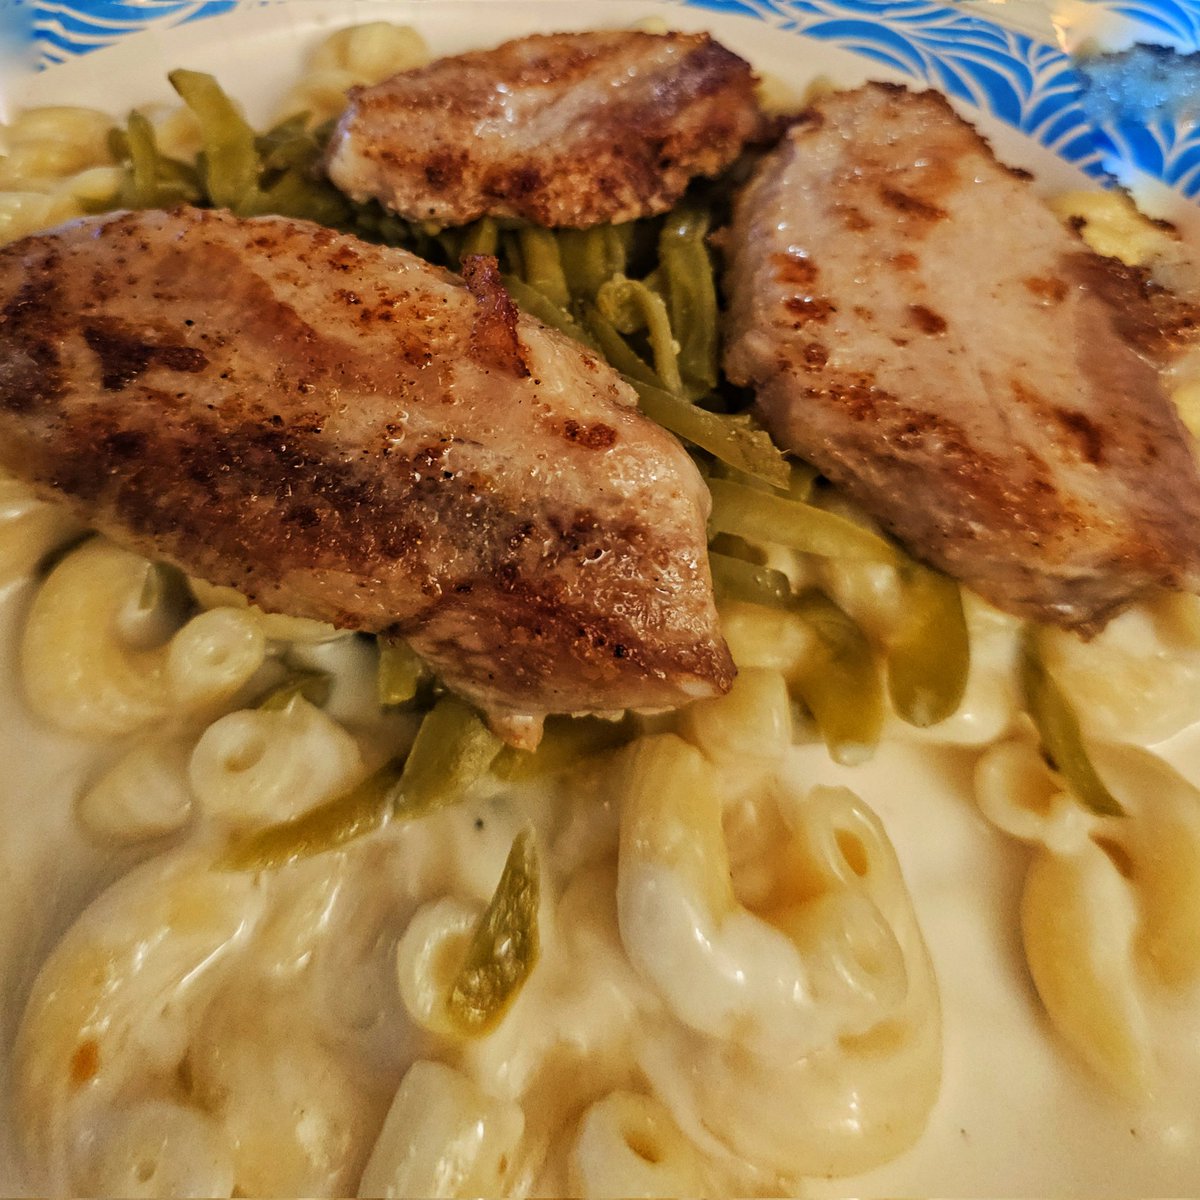 Chef Kris served Mac and Cheese, Pork Belly, and Green Beans for Dinner tonight.